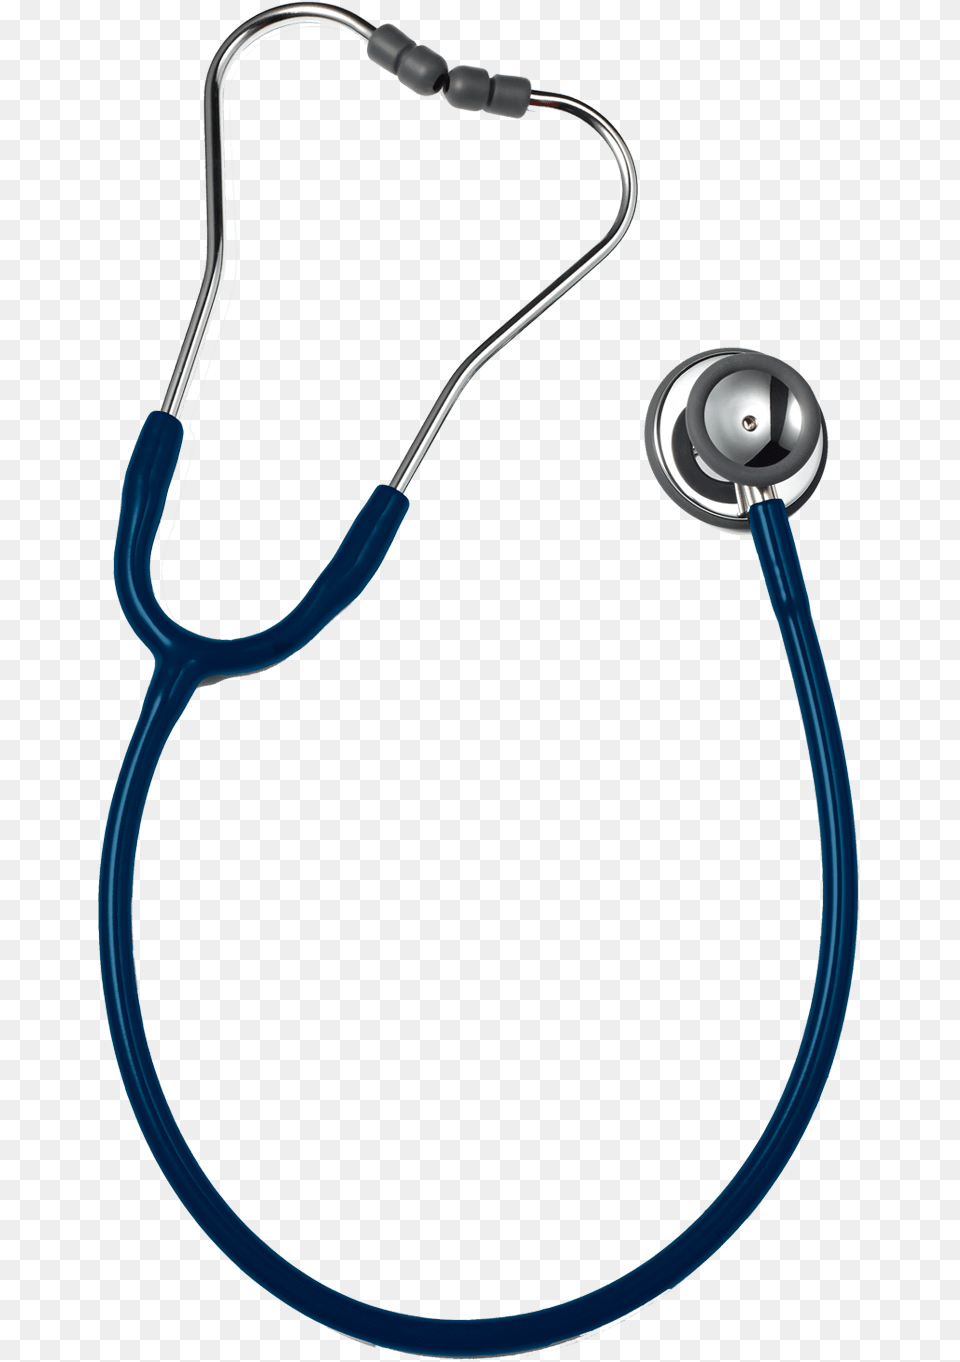 X 2048 3 Stthoscope Erka Finesse, Smoke Pipe, Stethoscope Free Transparent Png